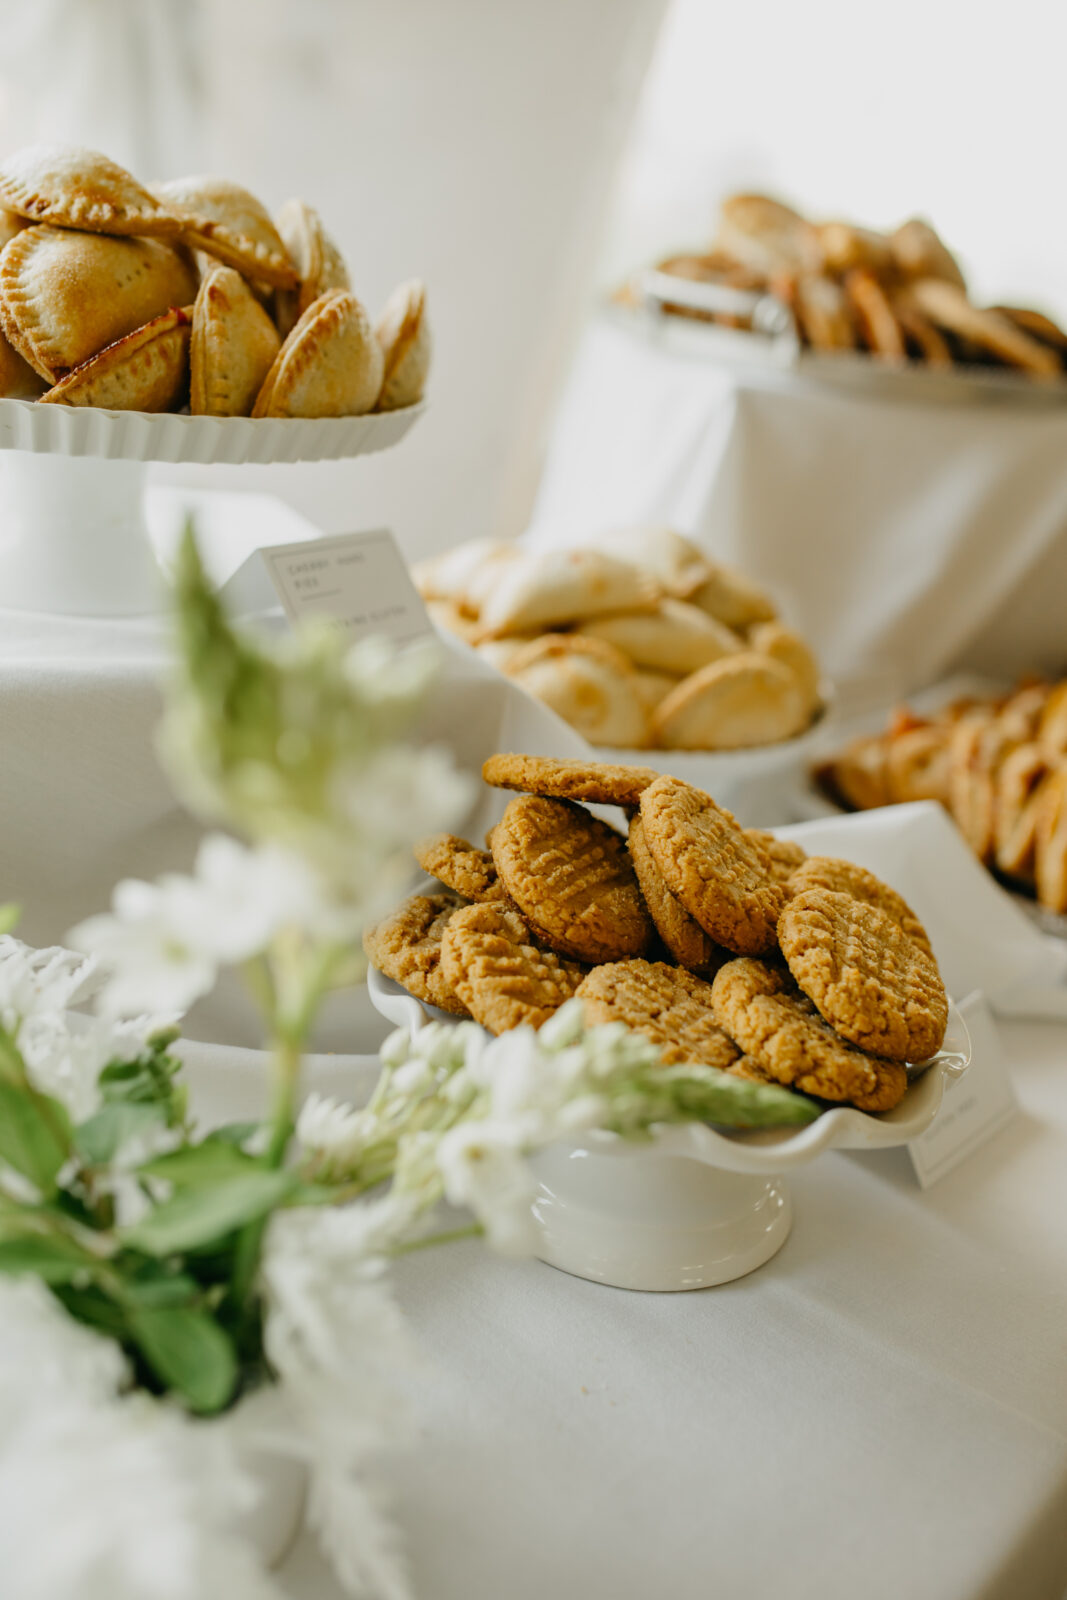 Photo of empanadas and other foods served during the wedding day